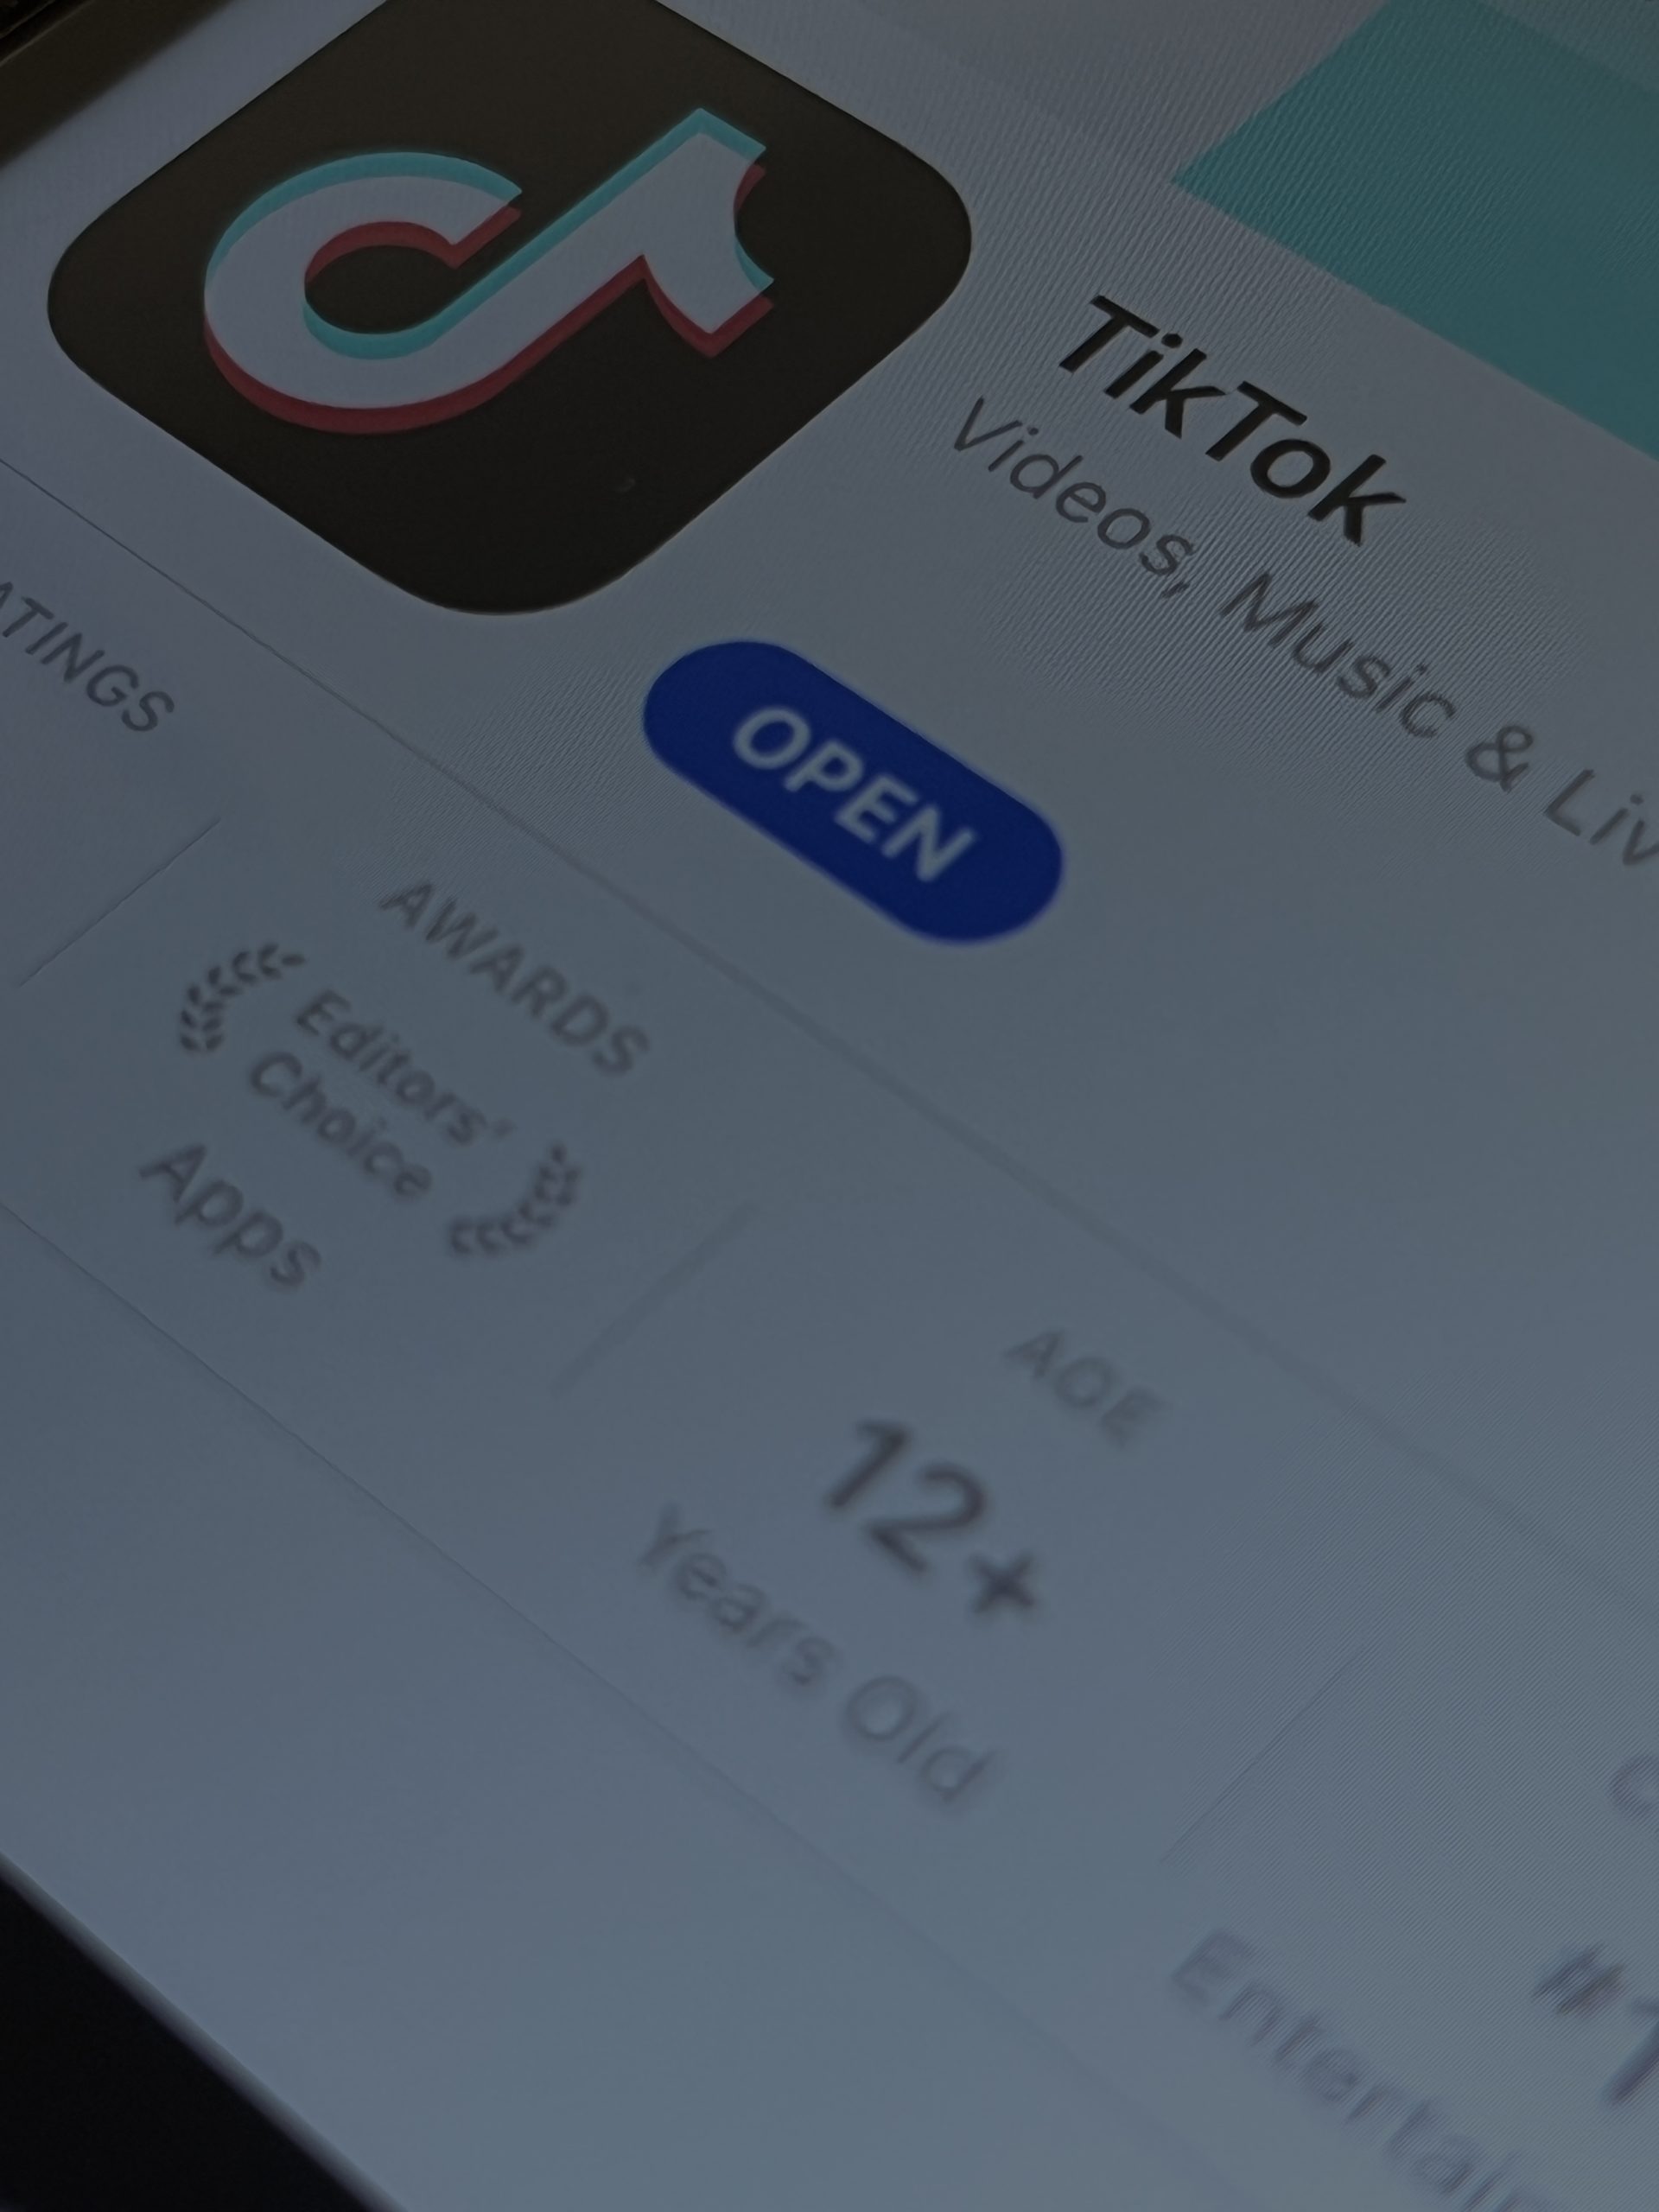 The TikTok ban is just a Political Performance disguised as Privacy Protection